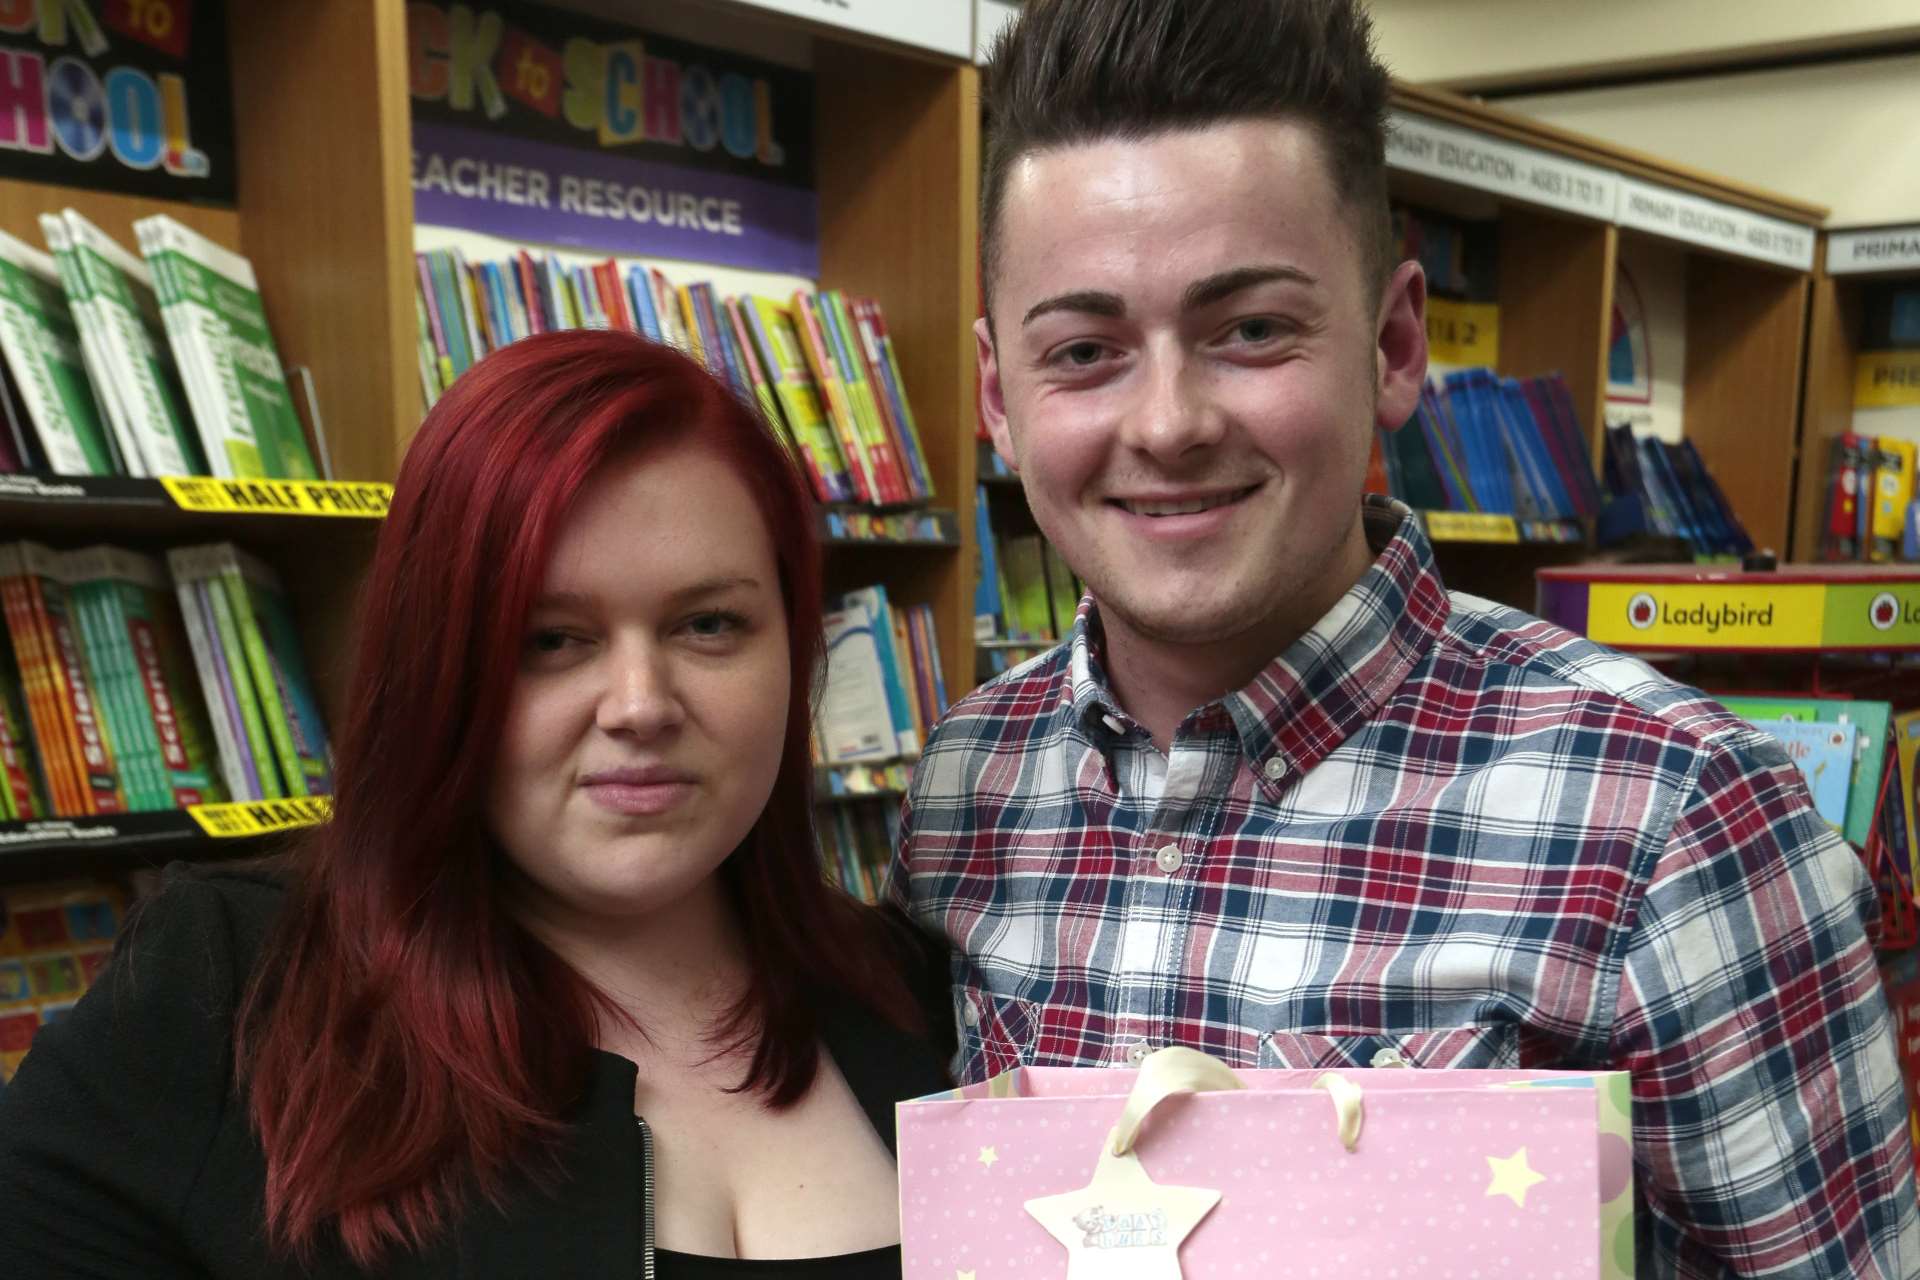 Paige Tomlinson and Craig Capp with their gifts for Katie Price's children